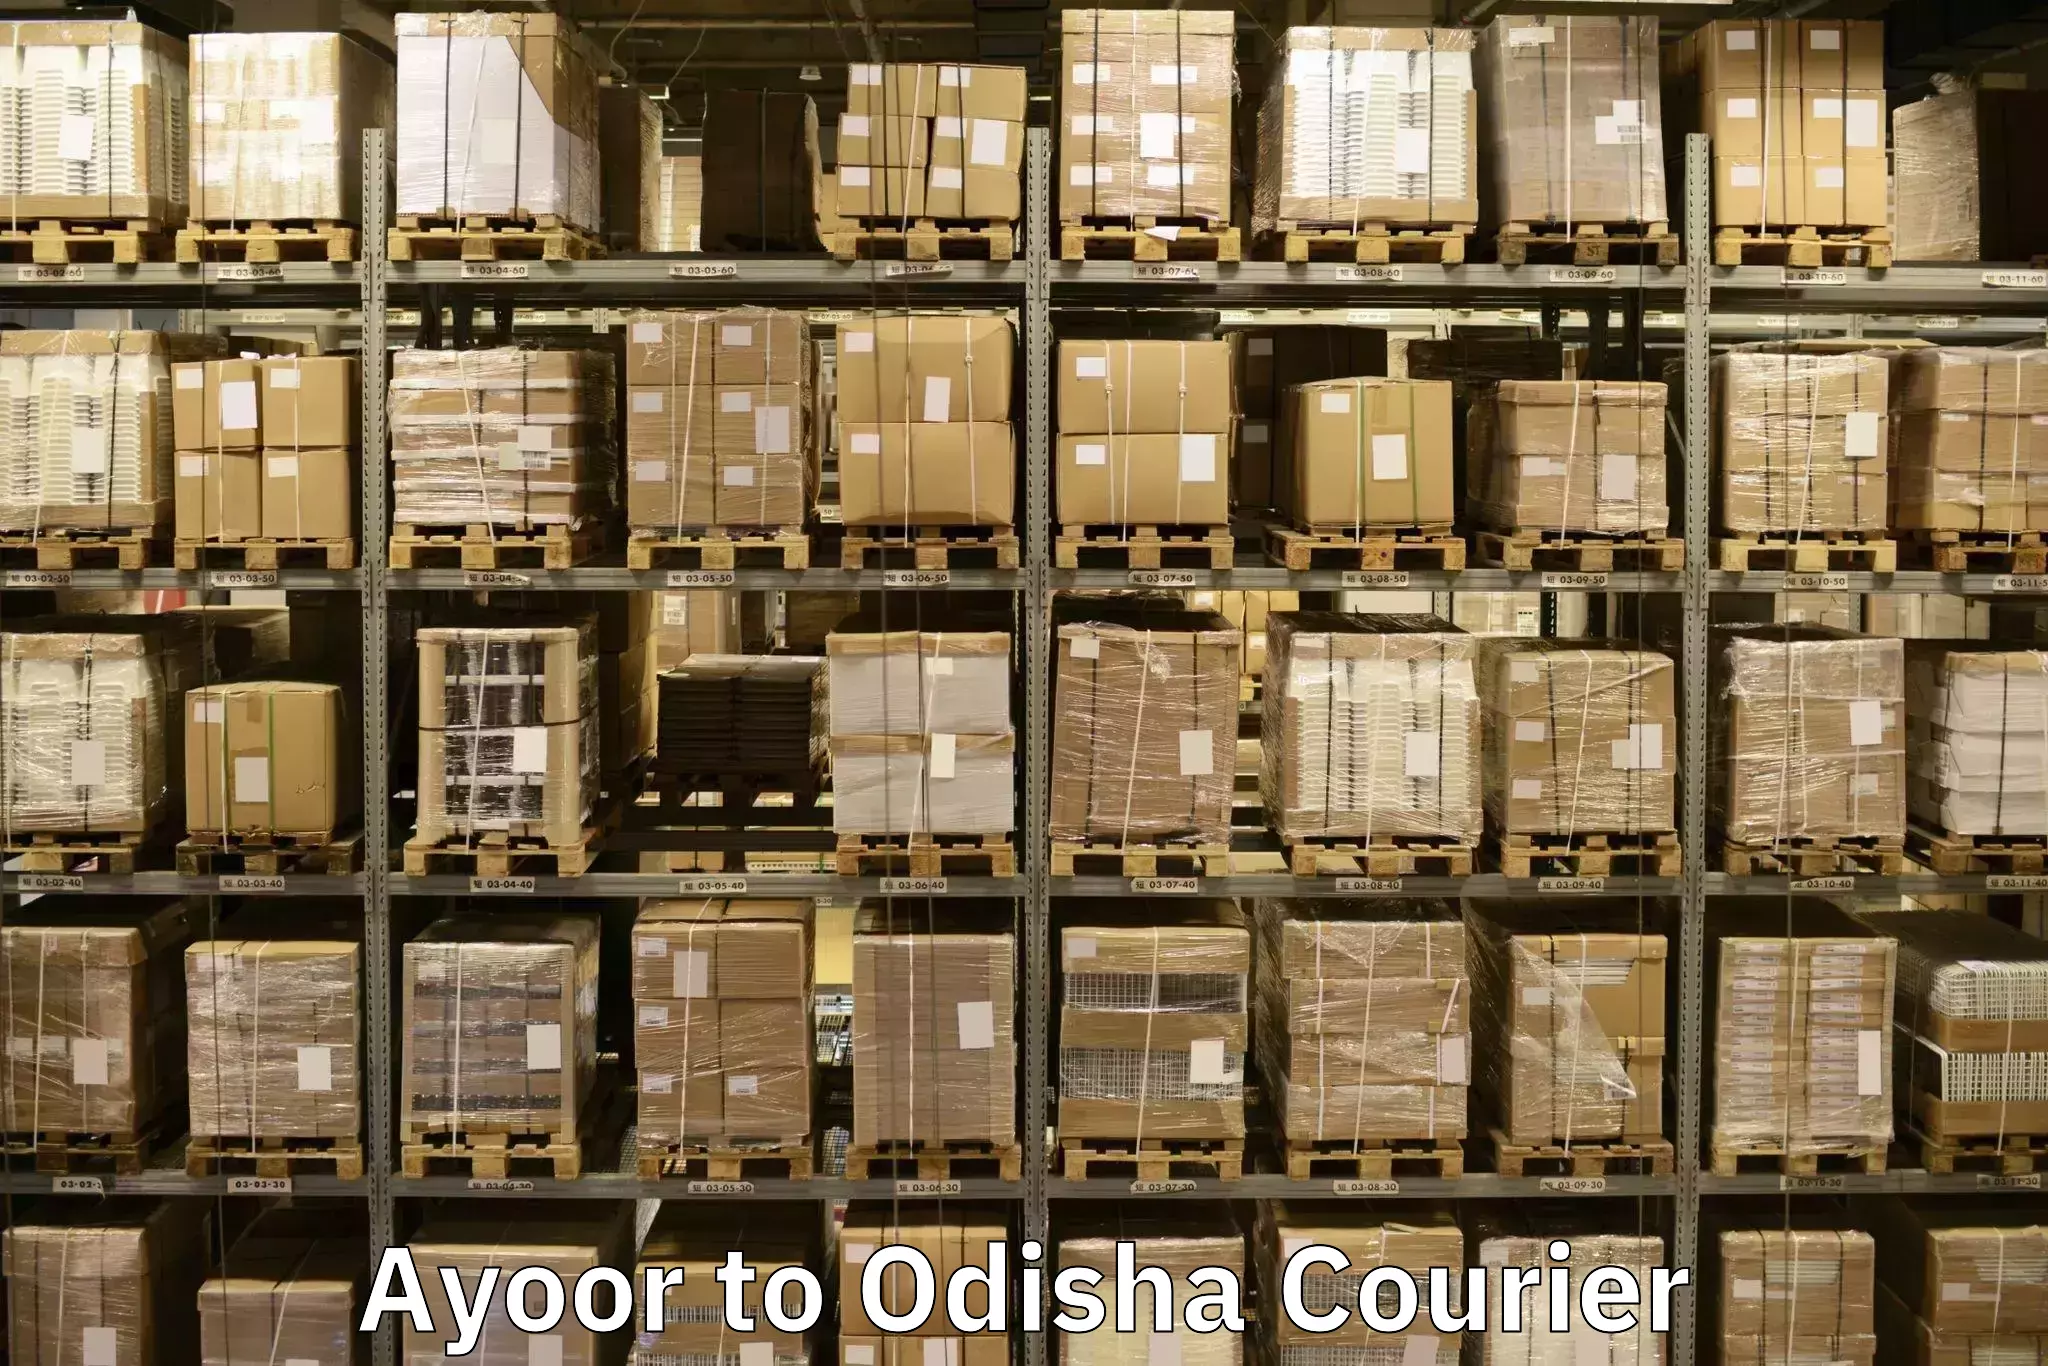 Furniture relocation experts Ayoor to Sohela